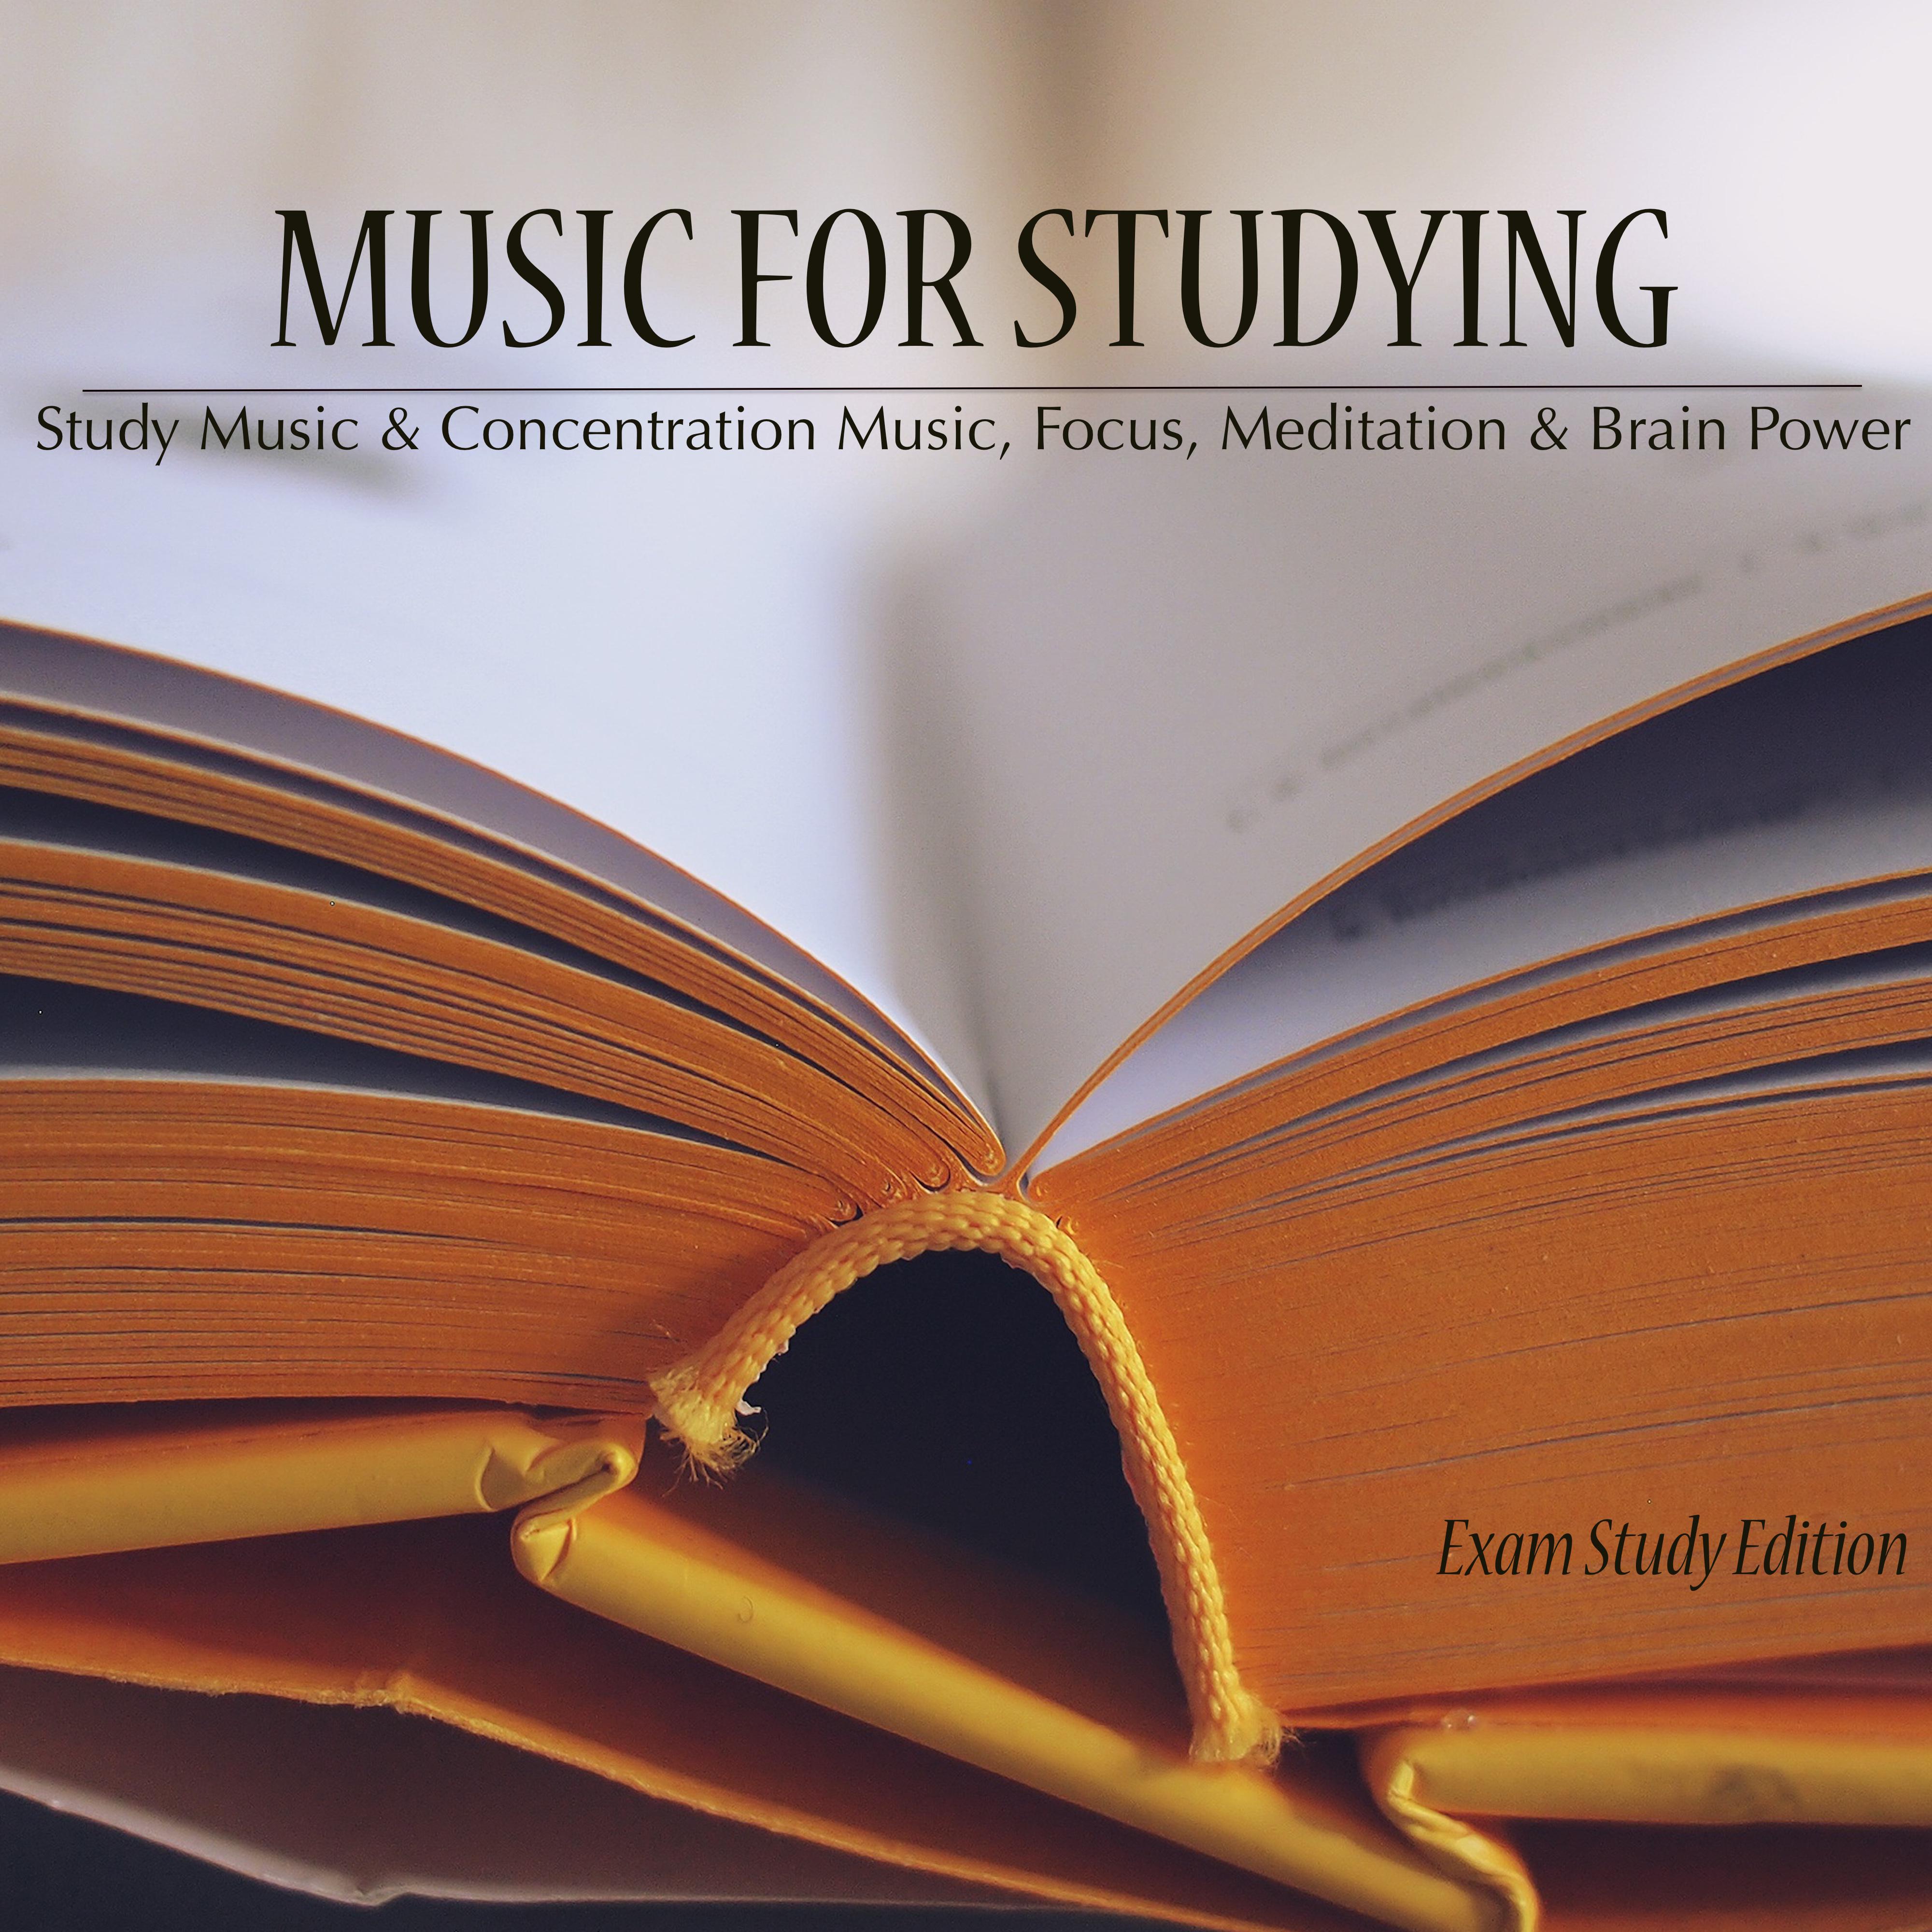 Background Music to Focus on Learning